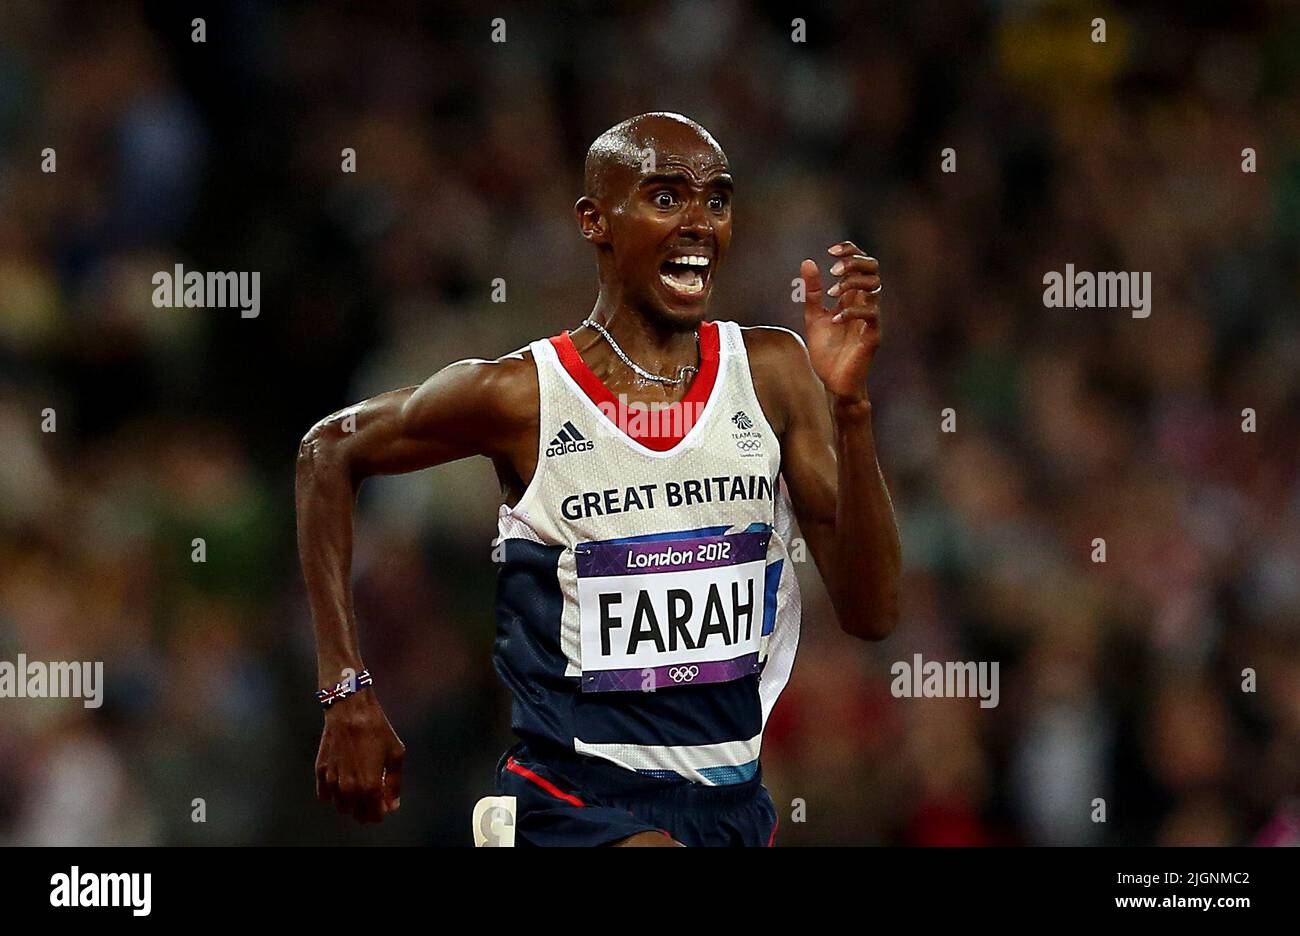 File photo dated 04-08-2012 of Great Britain's Mo Farah celebrates winning the Men's 10,000m final at the Olympic Stadium, London, on the eighth day of the London 2012 Olympics. Sir Mo Farah has revealed in a BBC documentary that he was brought into the UK illegally under the name of another child. Issue date: Tuesday July 12, 2022. Stock Photo